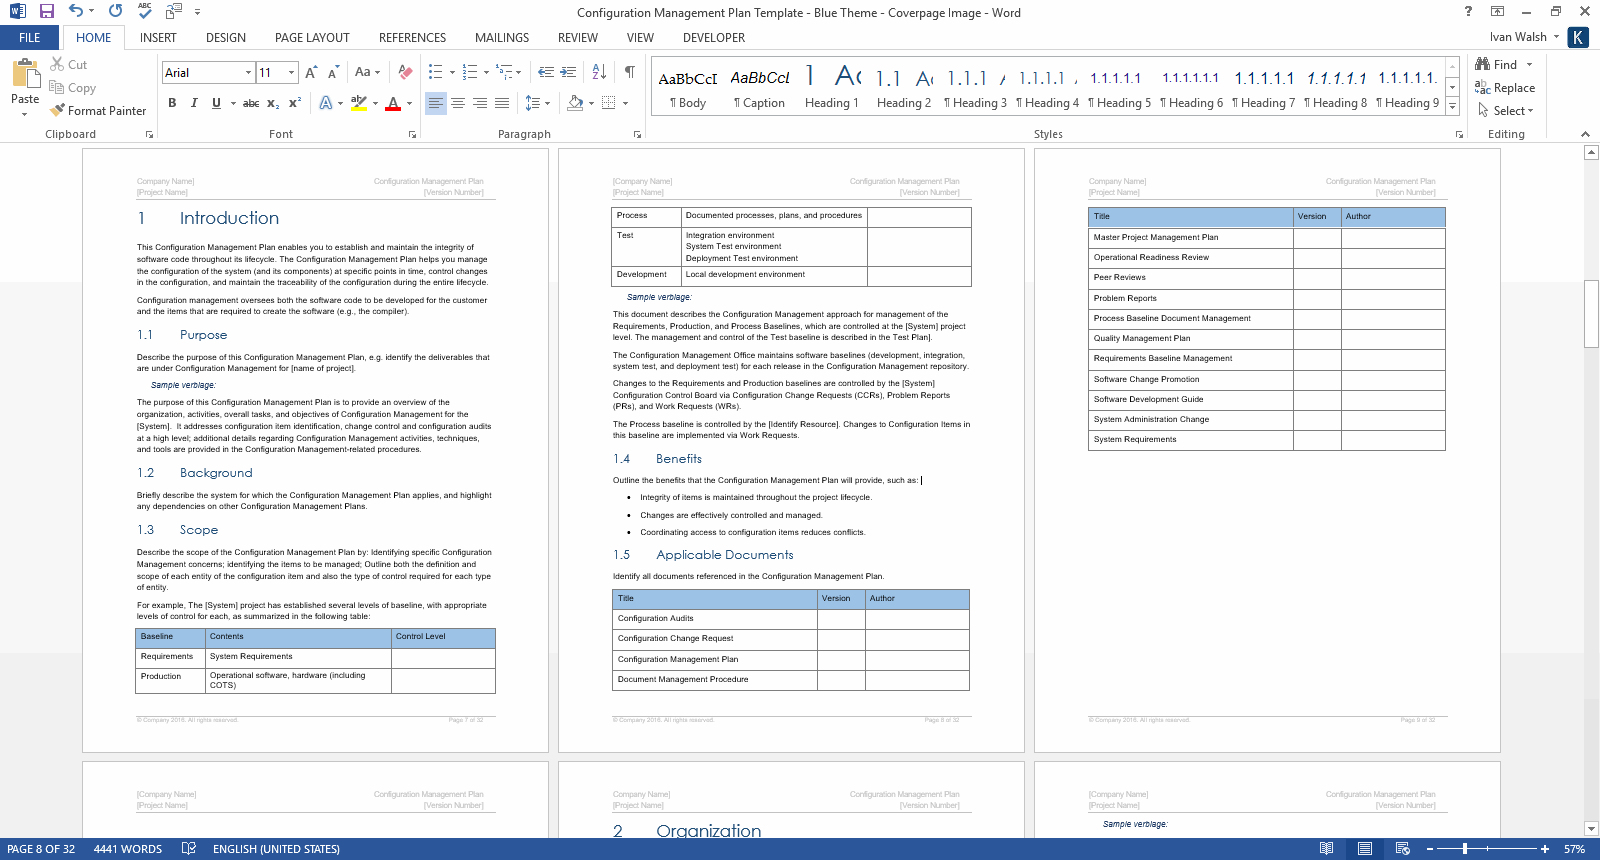 ms word for mac picture content control